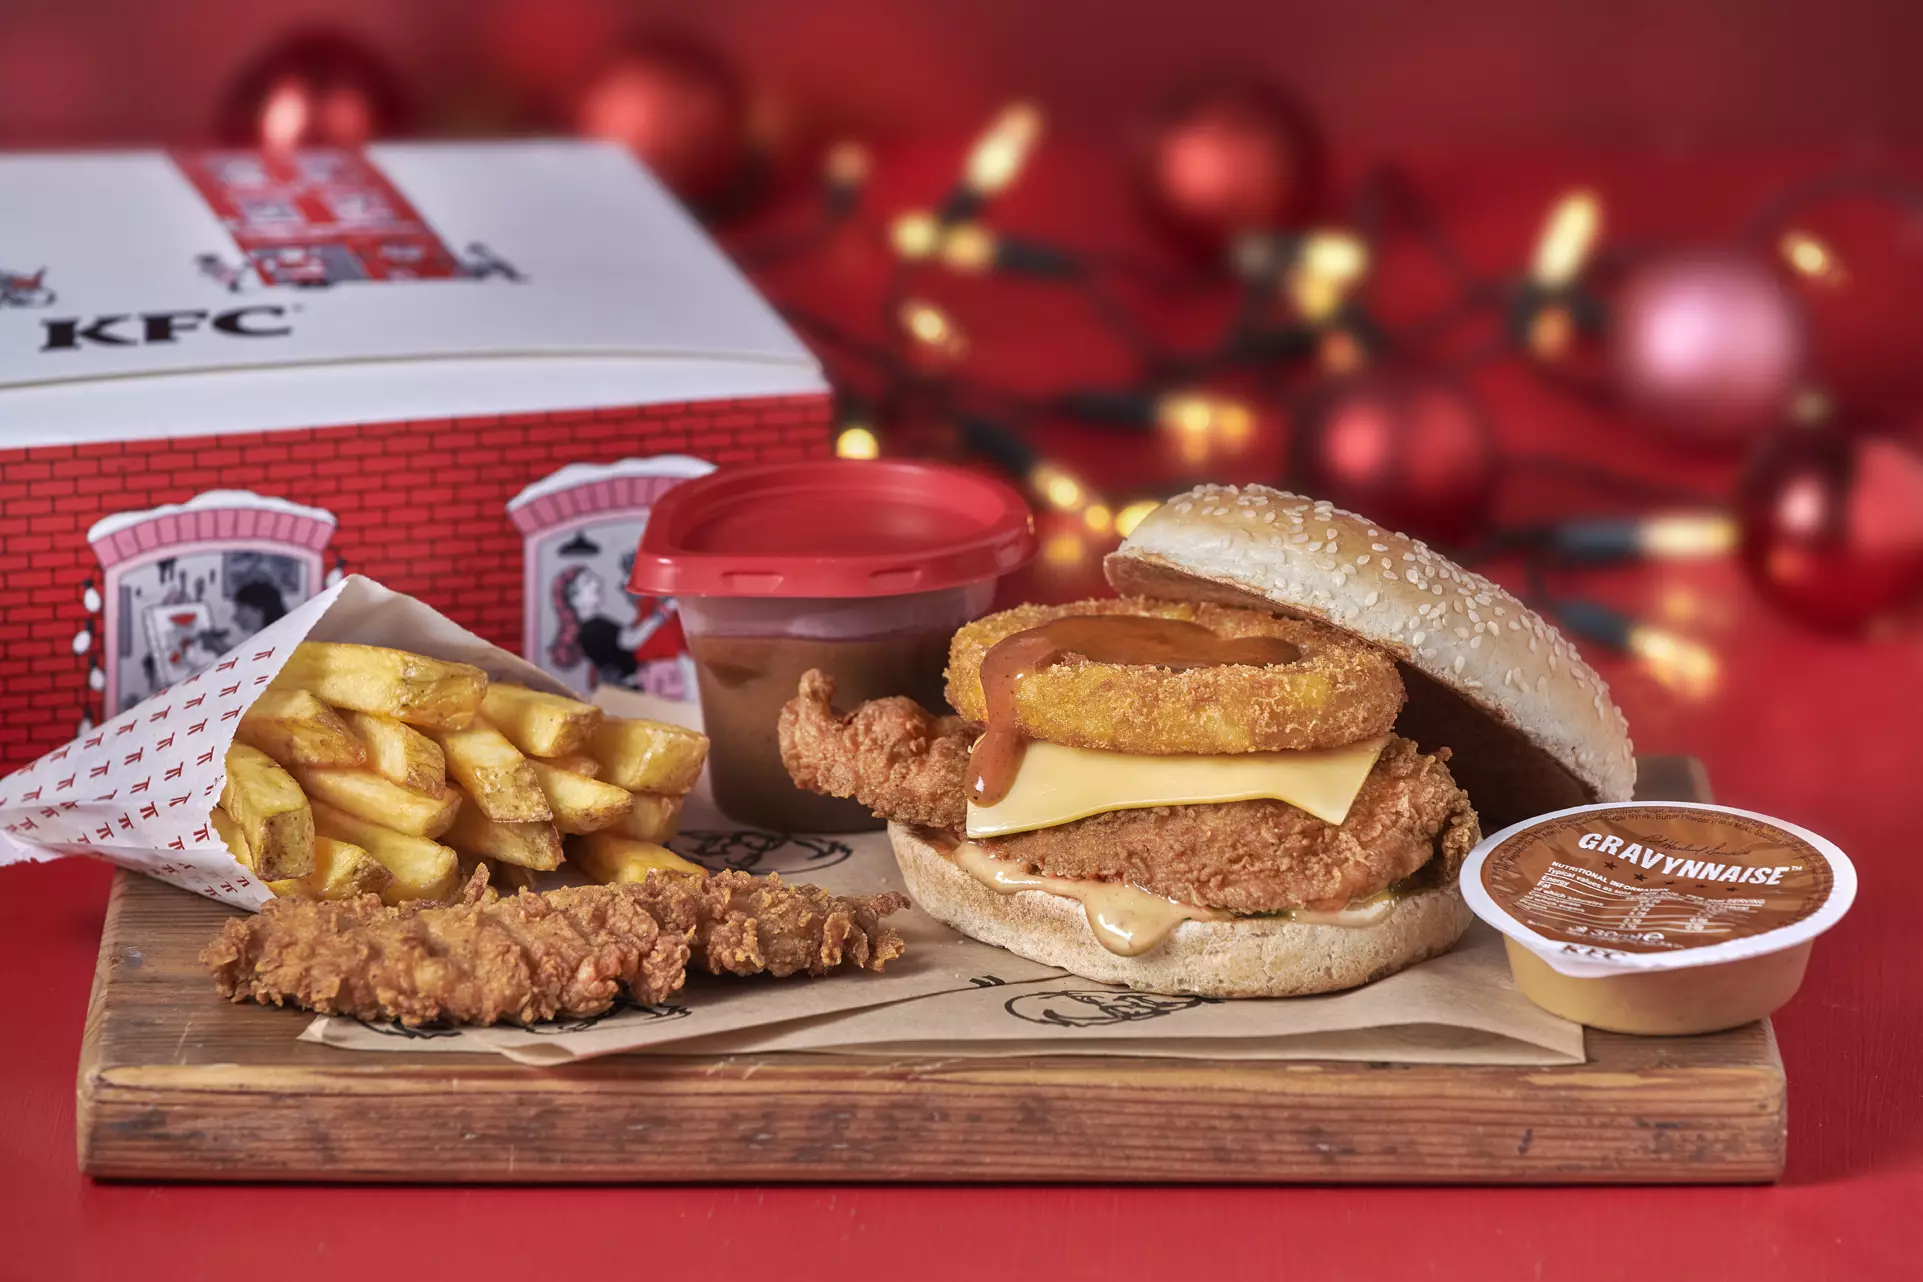 The Gravy Burger Box meal is priced from £6.99 (